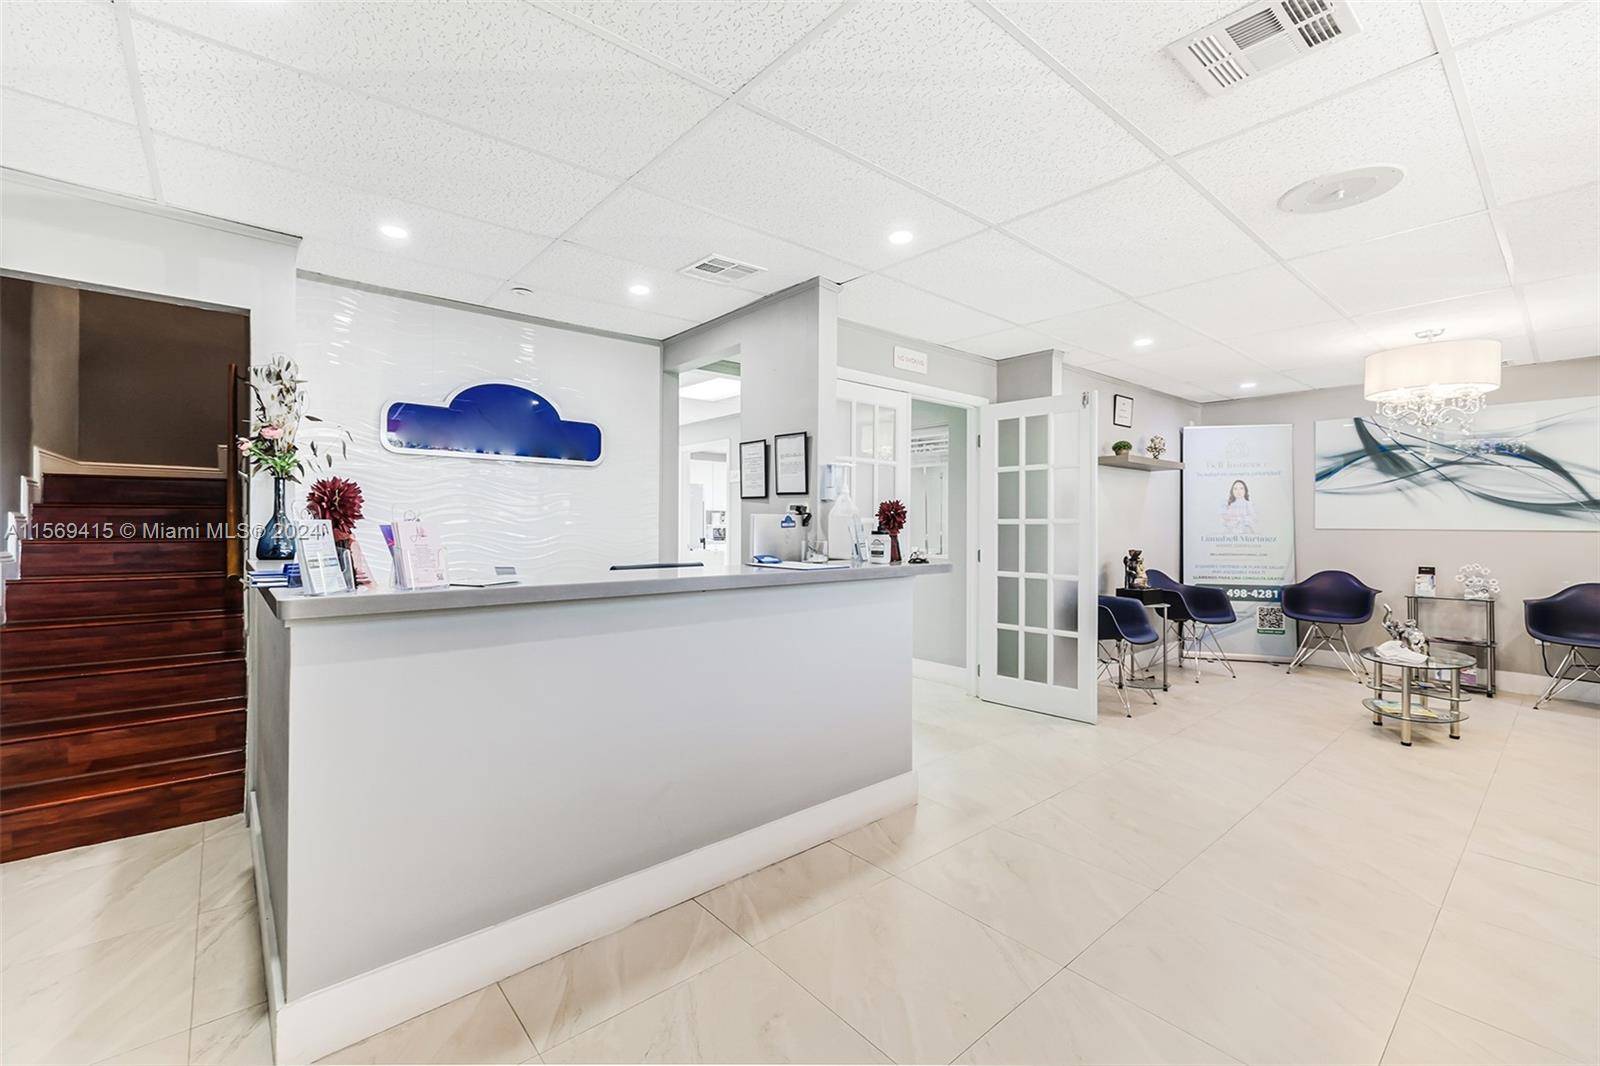 Commercial Condo Office completely remodeled for medical use Medical Business NOT For Sale in a great location in Hialeah by 76th St 20th Ave right off the Palmetto Expressway.